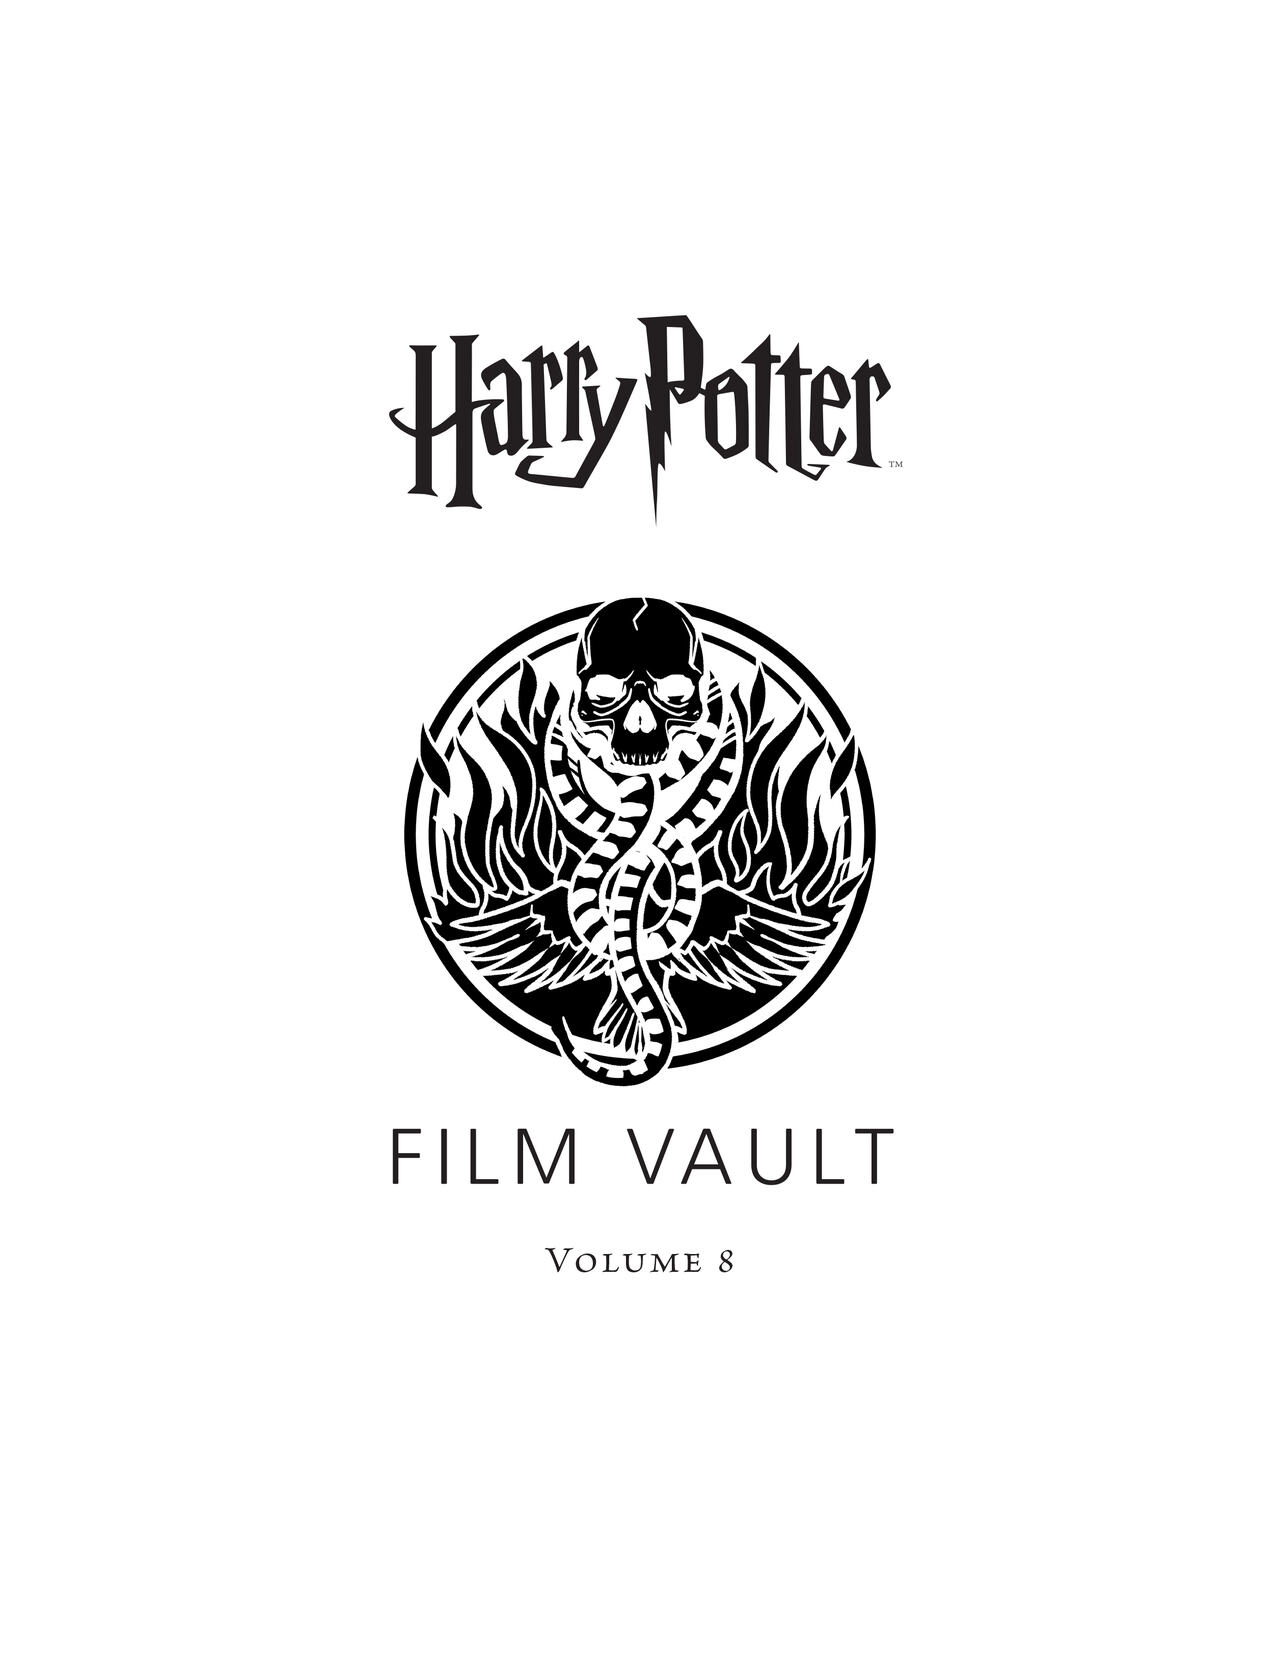 Harry Potter - Film Vault v08 - The Order of the Phoenix and Dark Forces 2